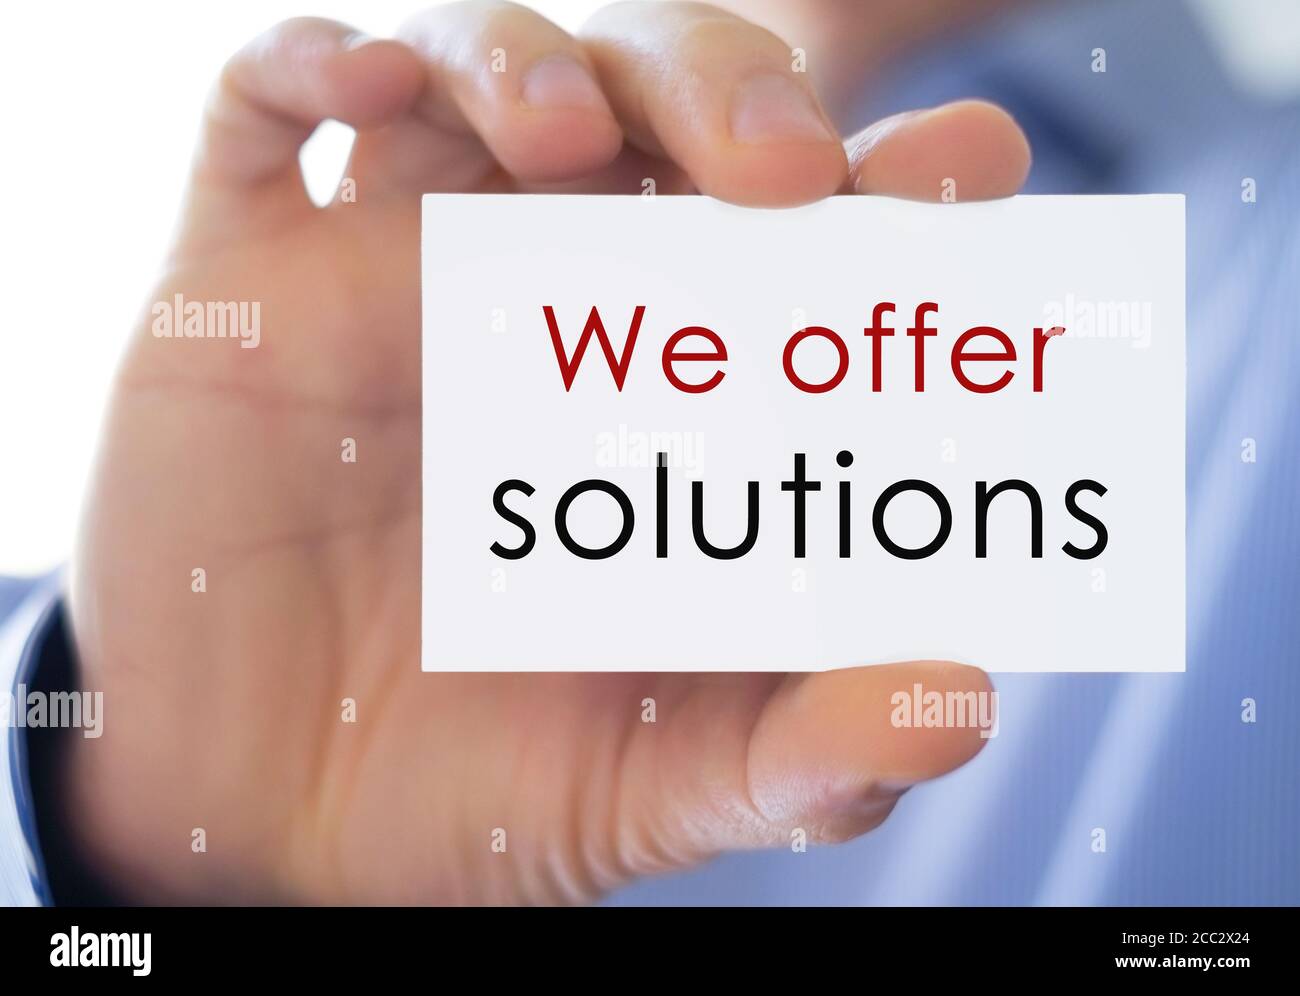 we offer solutions - business card information Stock Photo